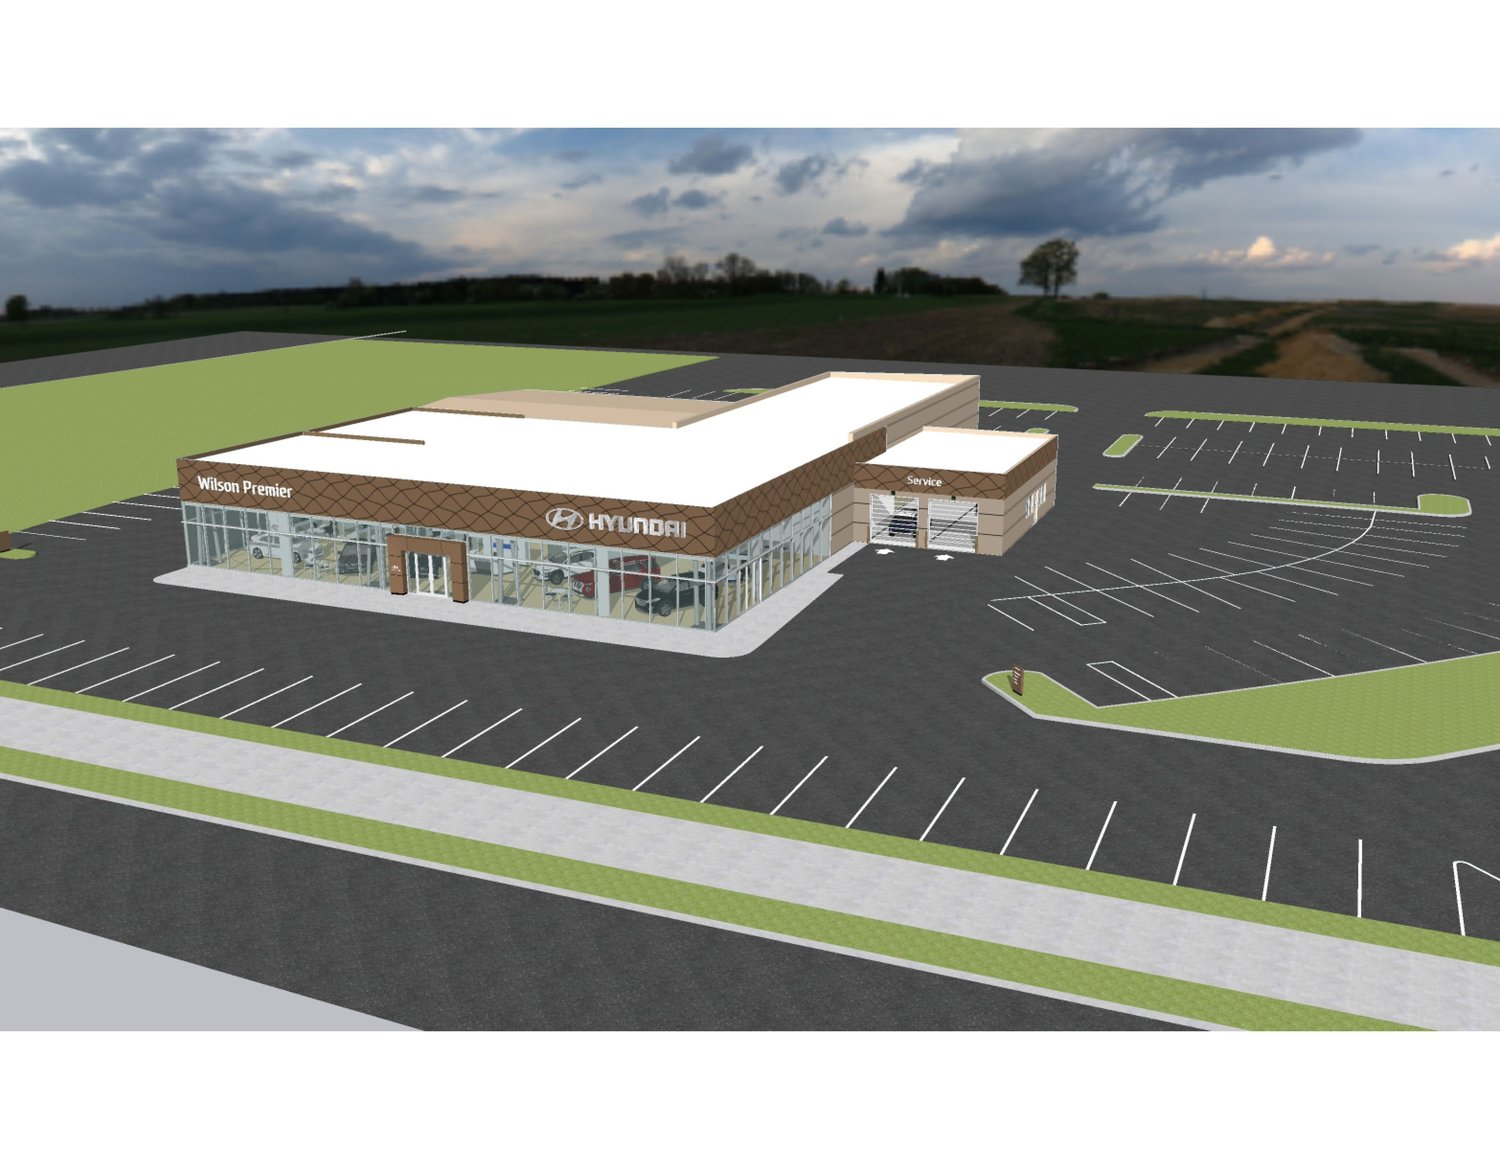 The Ridgeland Hyundai dealership will receive a facelift consistent with national brand upgrades.